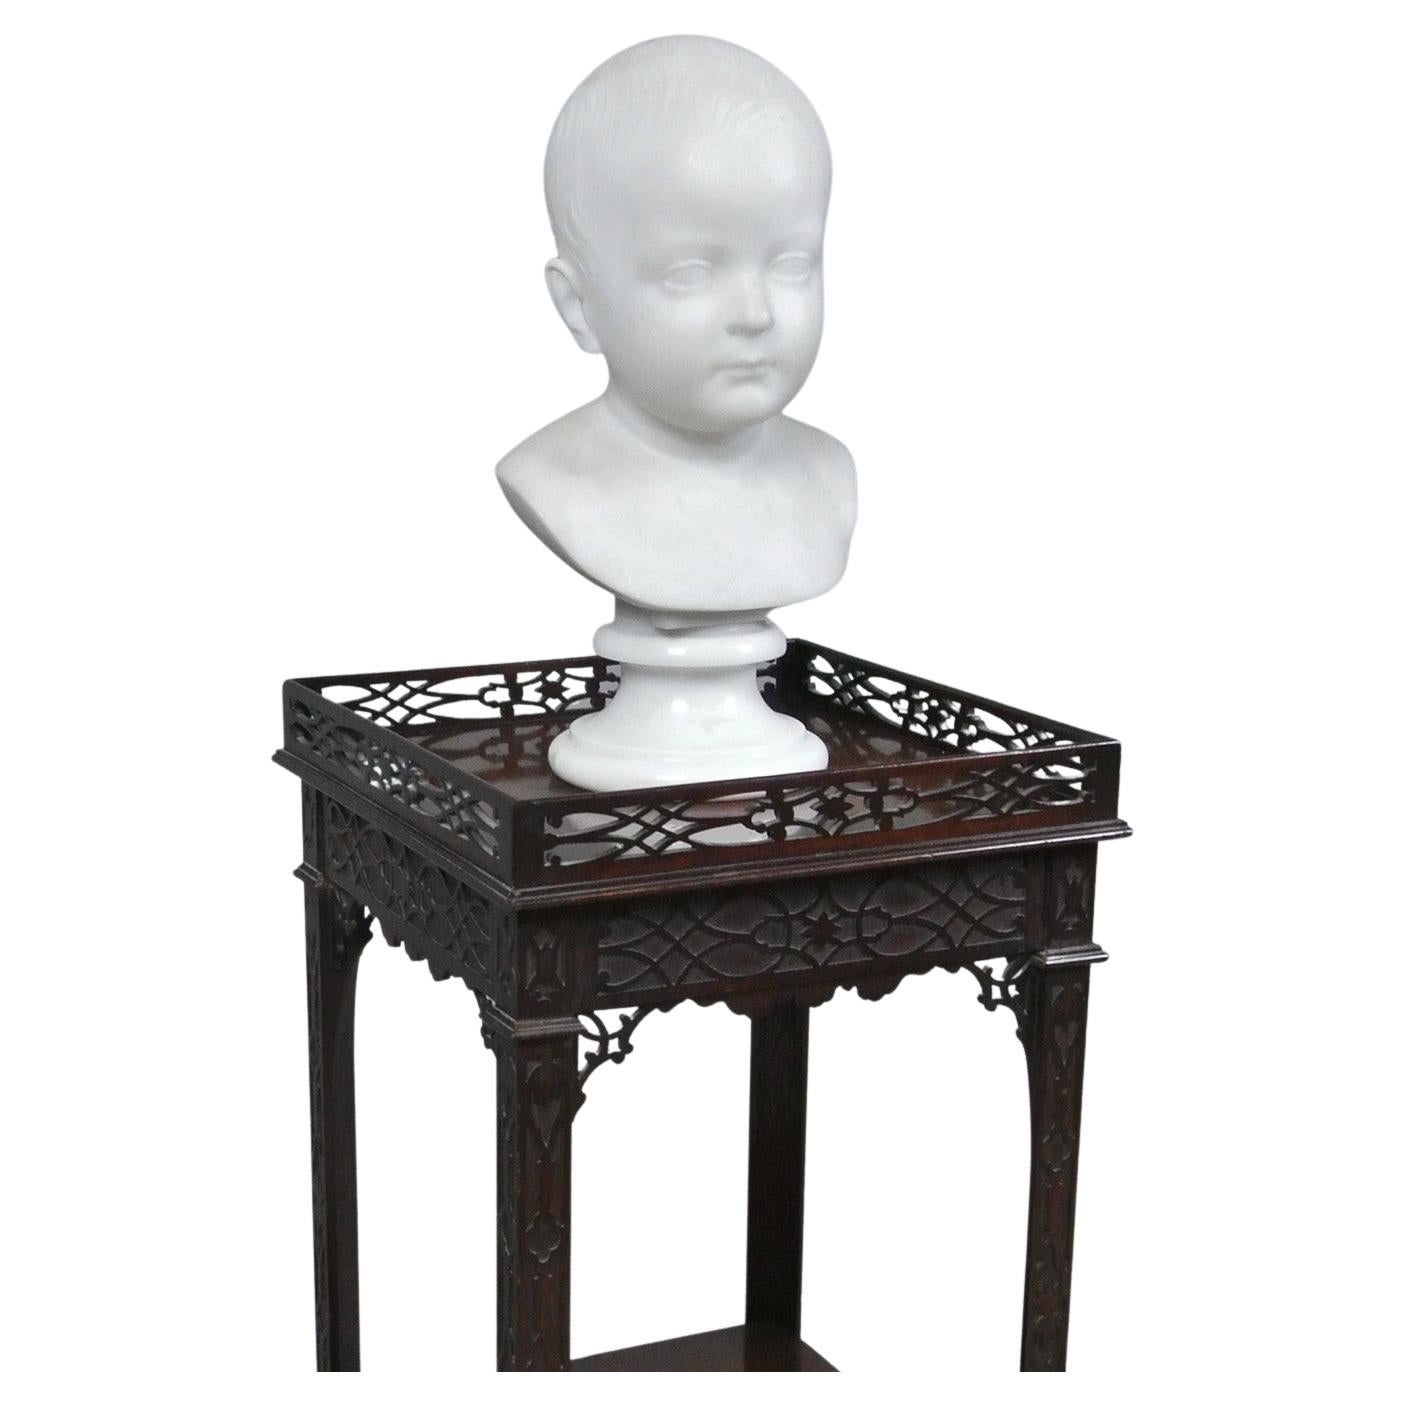 William Brodie Frsa Signed Marble Bust of the Artist's Daughter Dated 1877